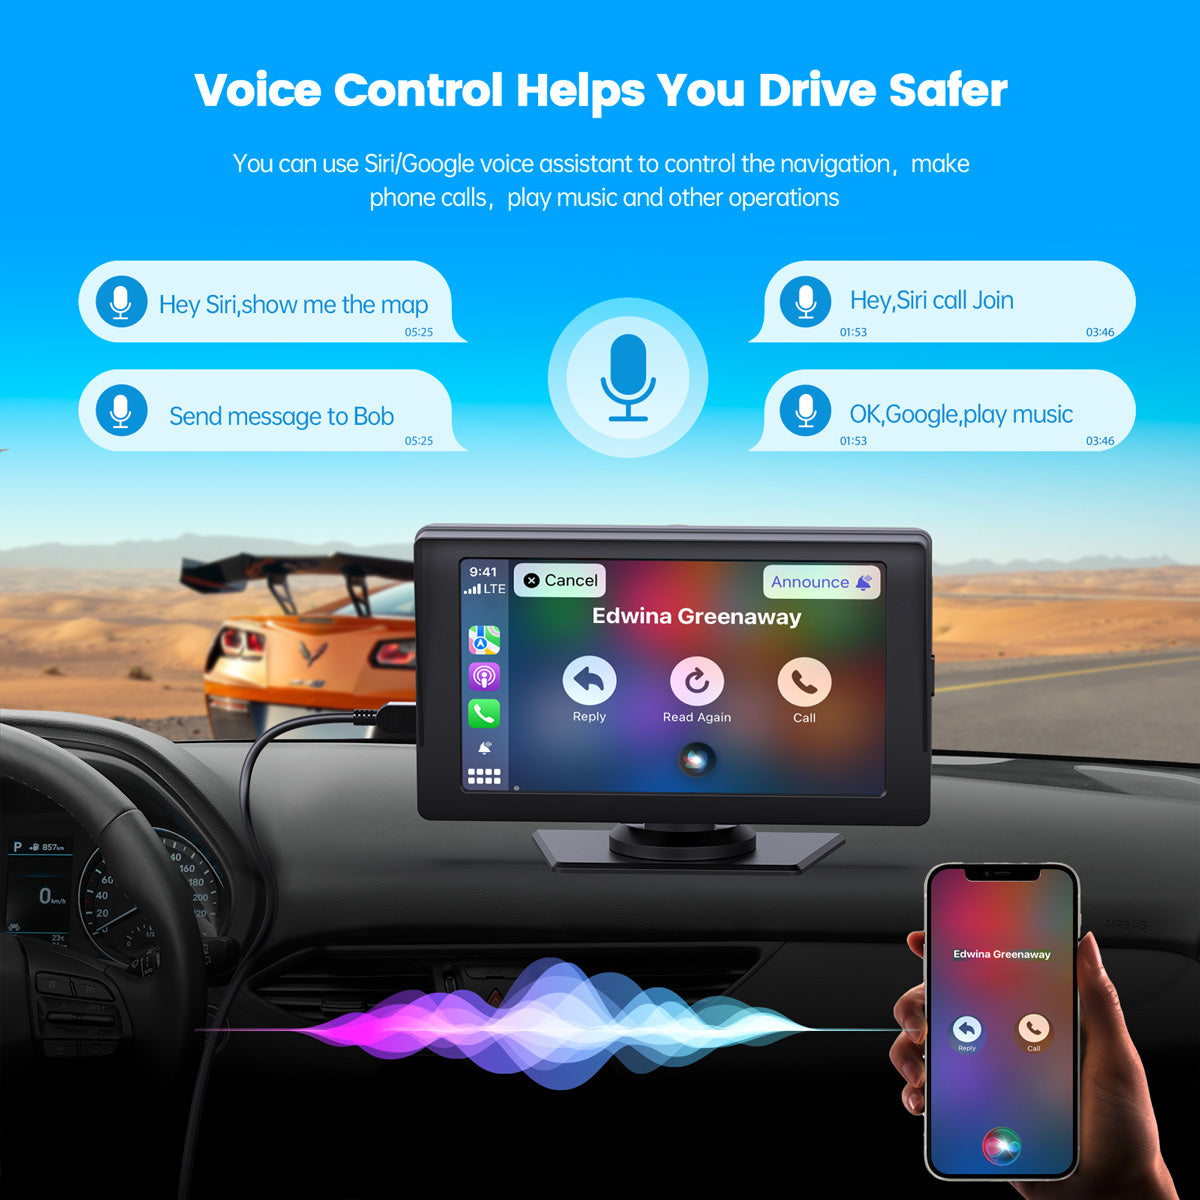 Toguard RC04 7'' Wireless Apple Car Play & Android Auto Touch Screen Sync GPS Navigation Audio Car Radio Receiver for Car, Bluetooth, Siri, Multimedia Player, FM